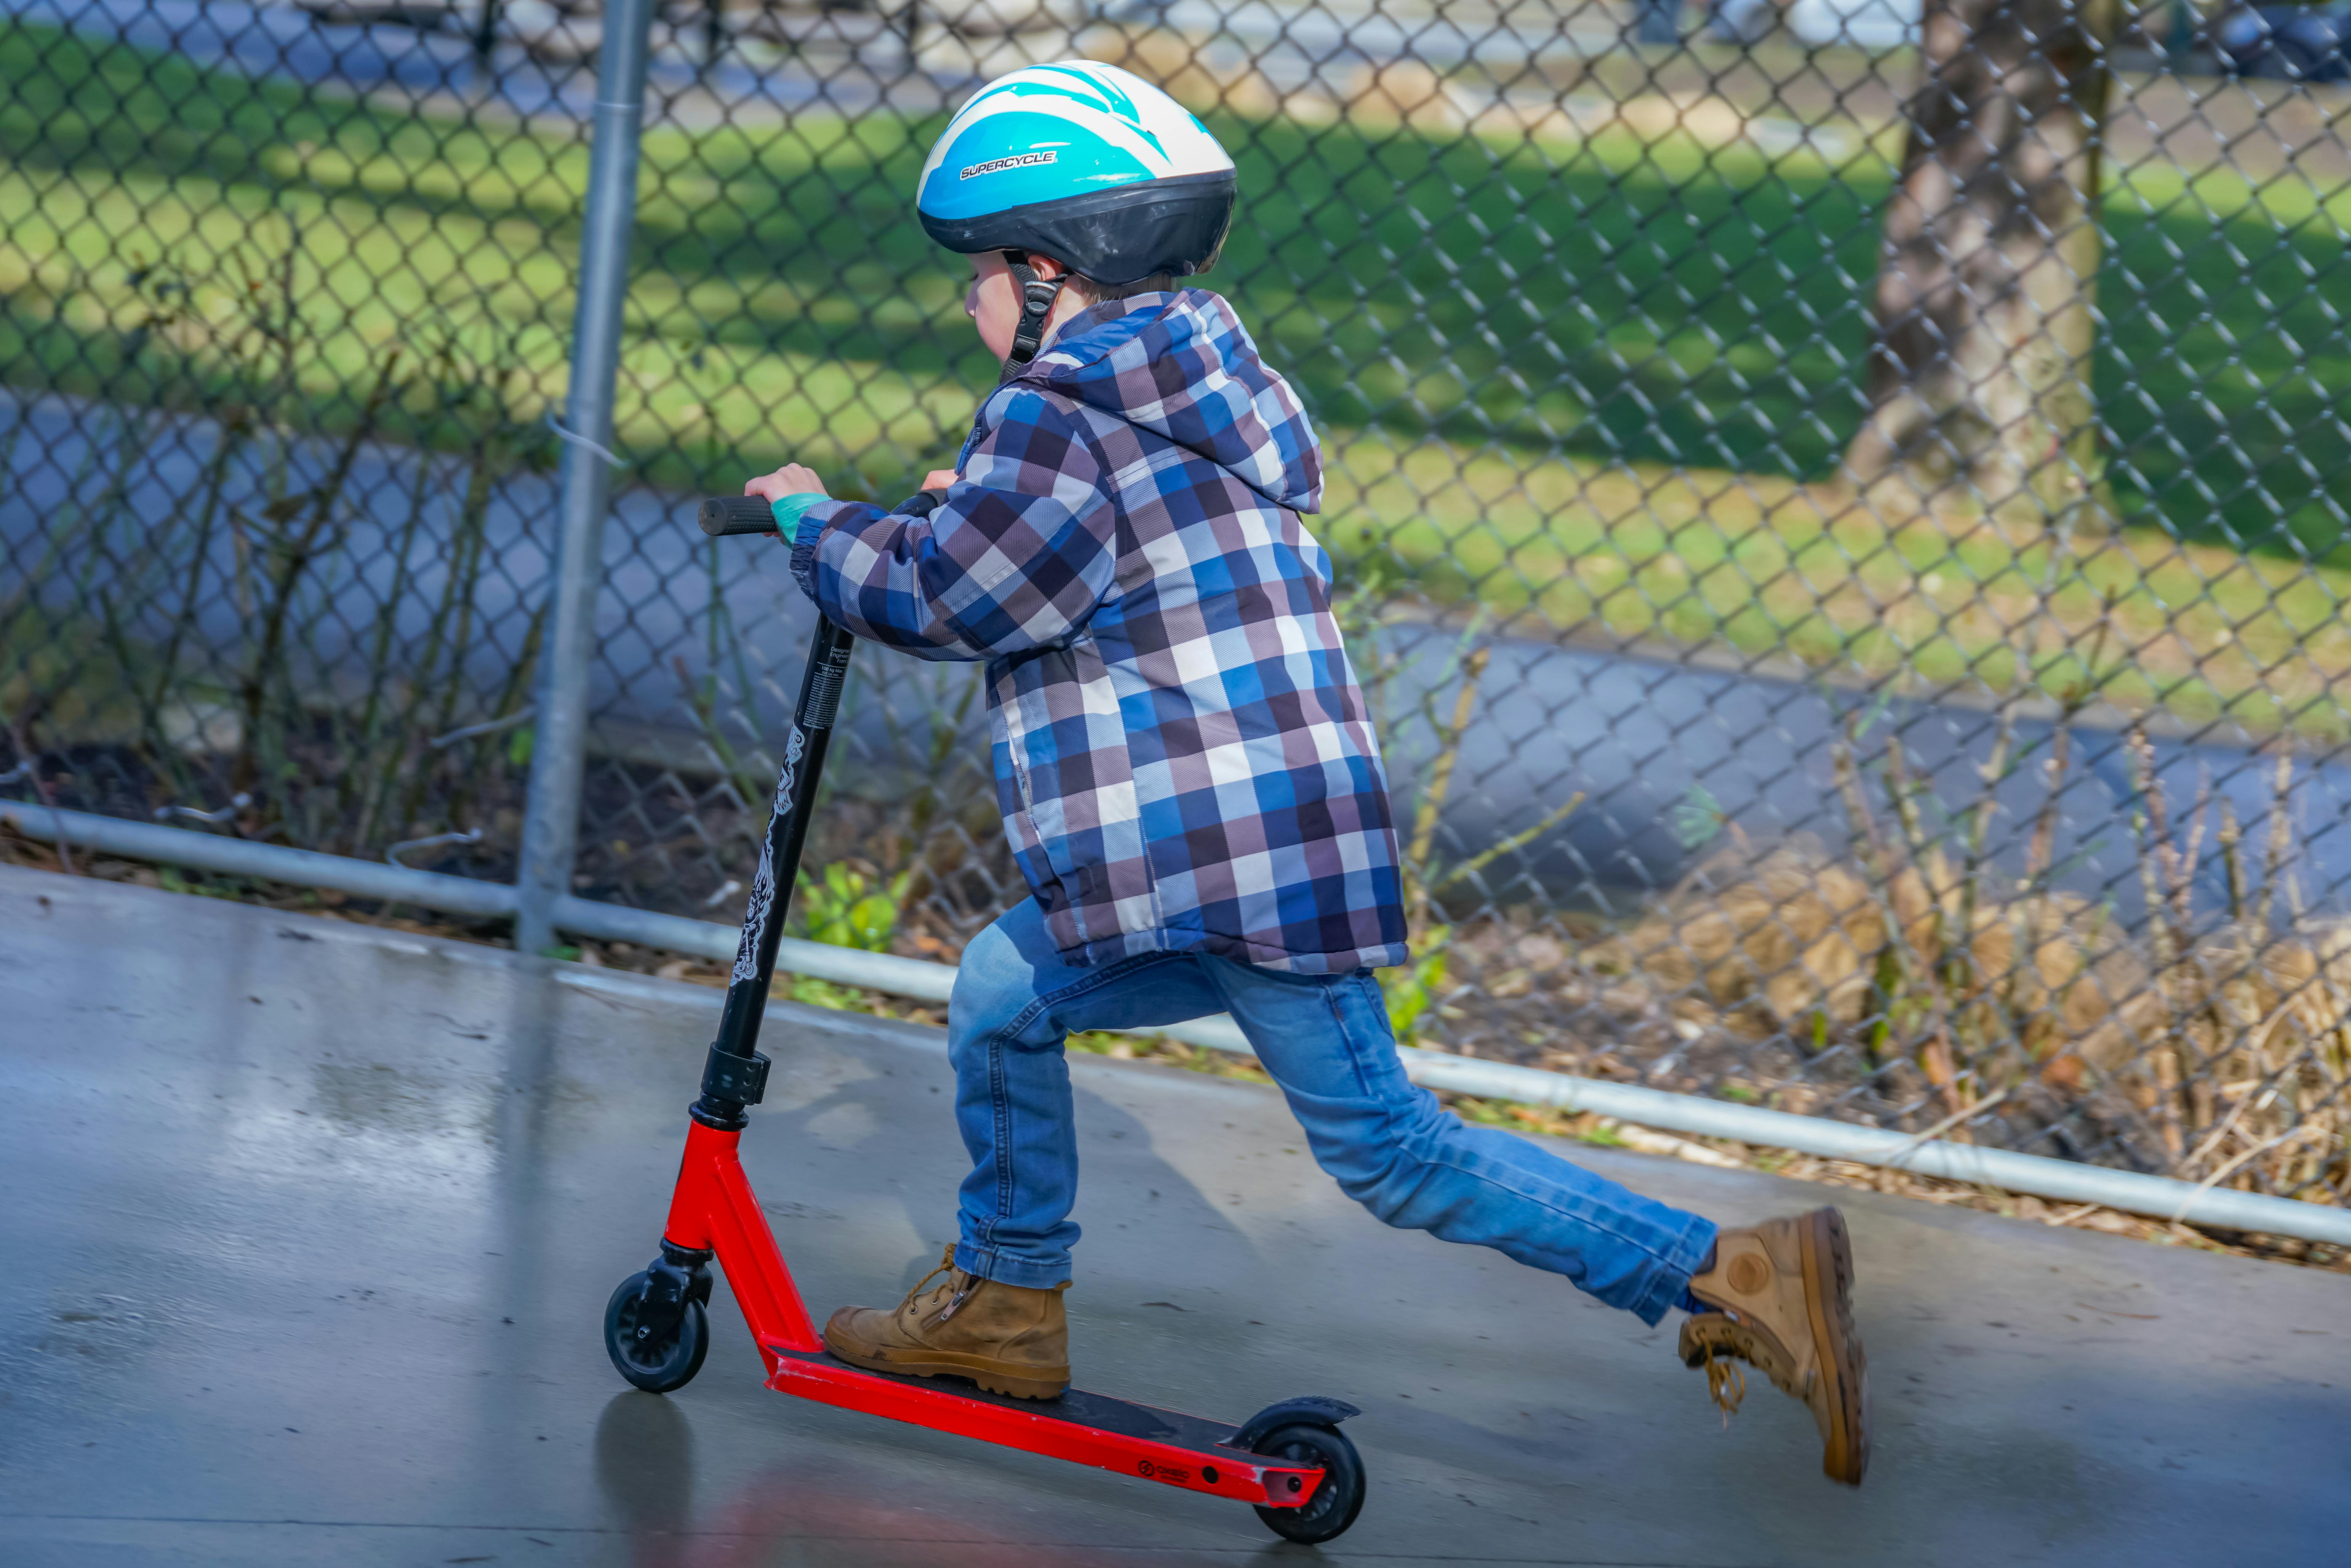 Child on a scooter in skate park